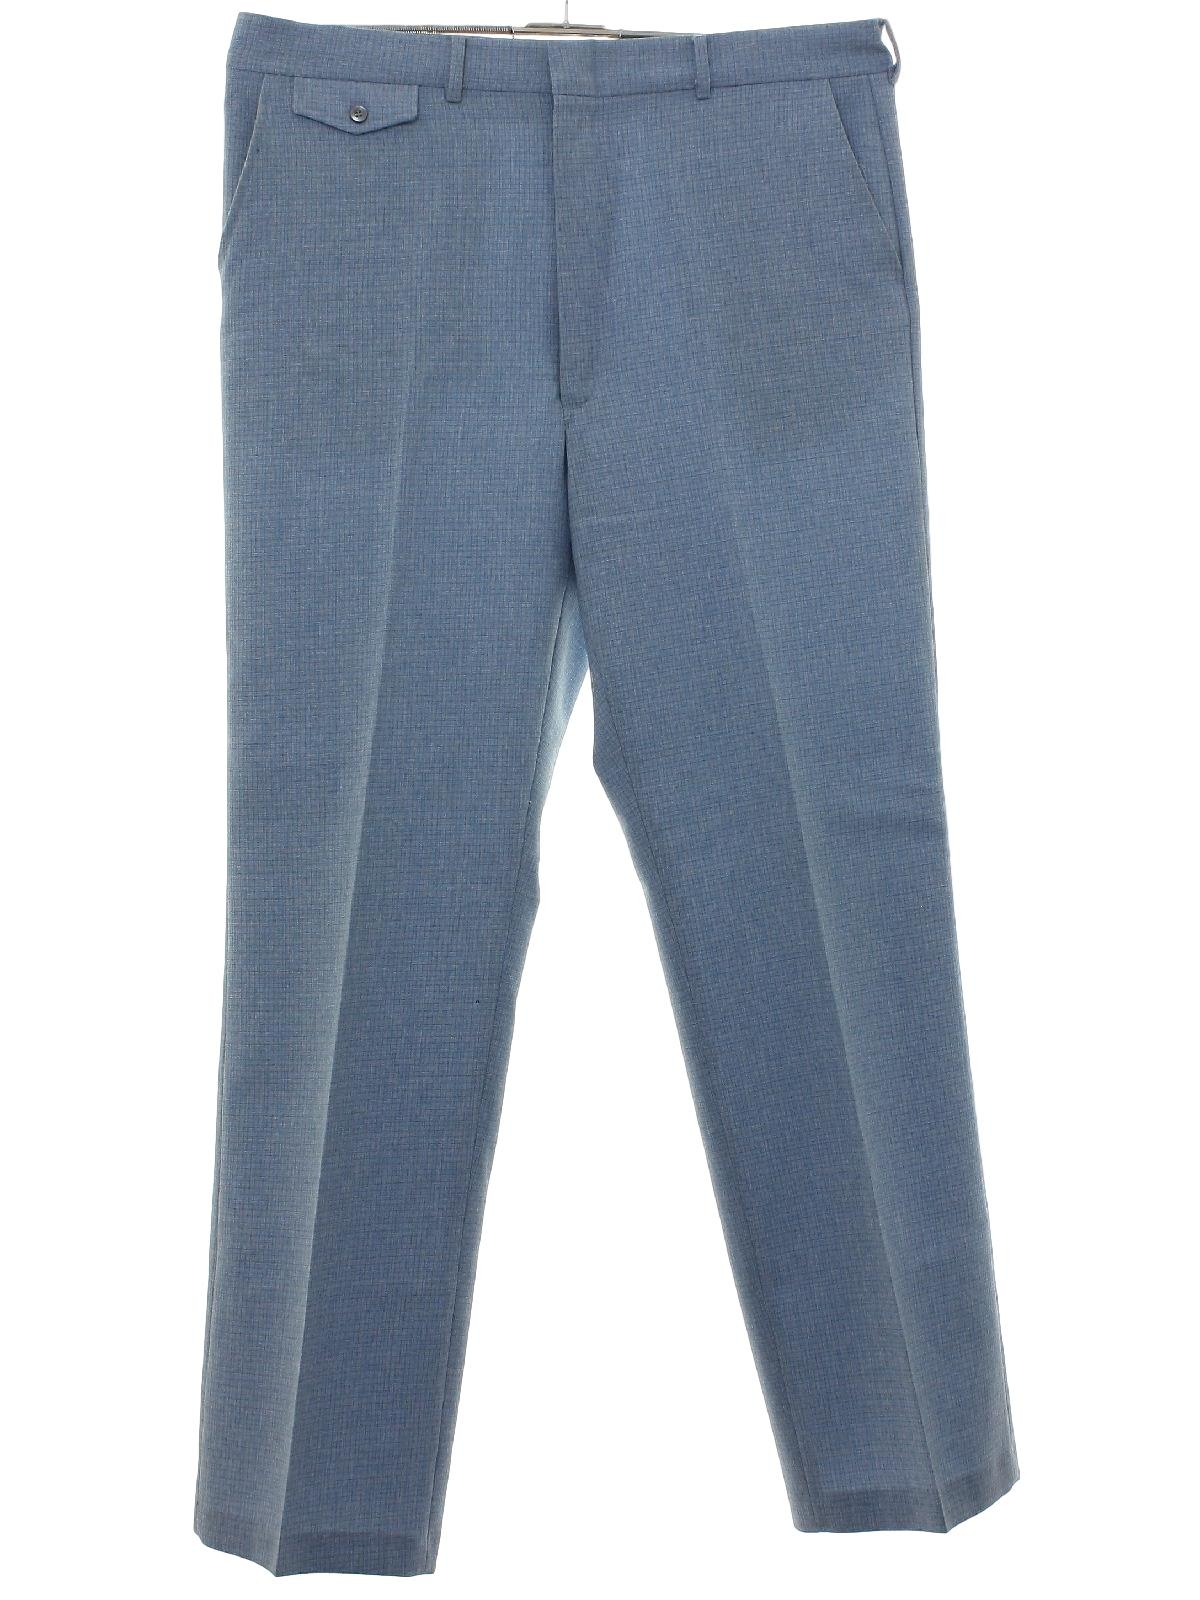 Eighties Haband Pants: Early 80s -Haband- Mens baby blue polyester ...